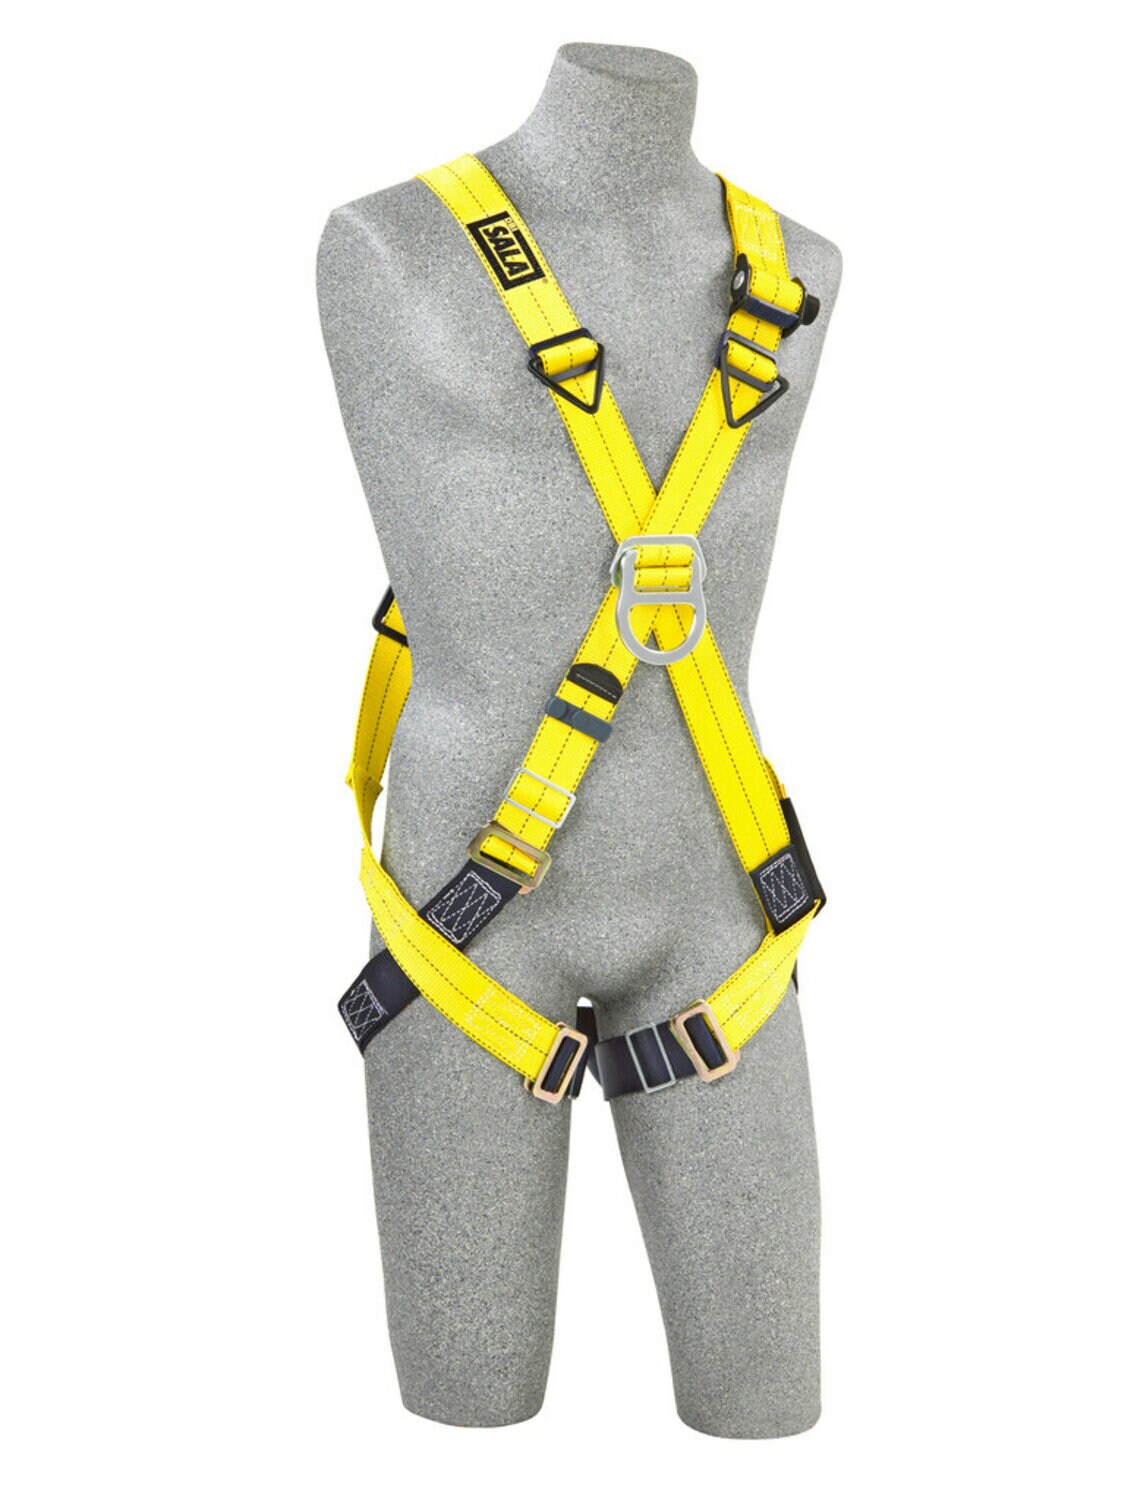 7012815299 - 3M DBI-SALA Delta Cross-Over Climbing Safety Harness 1101854, X-Small